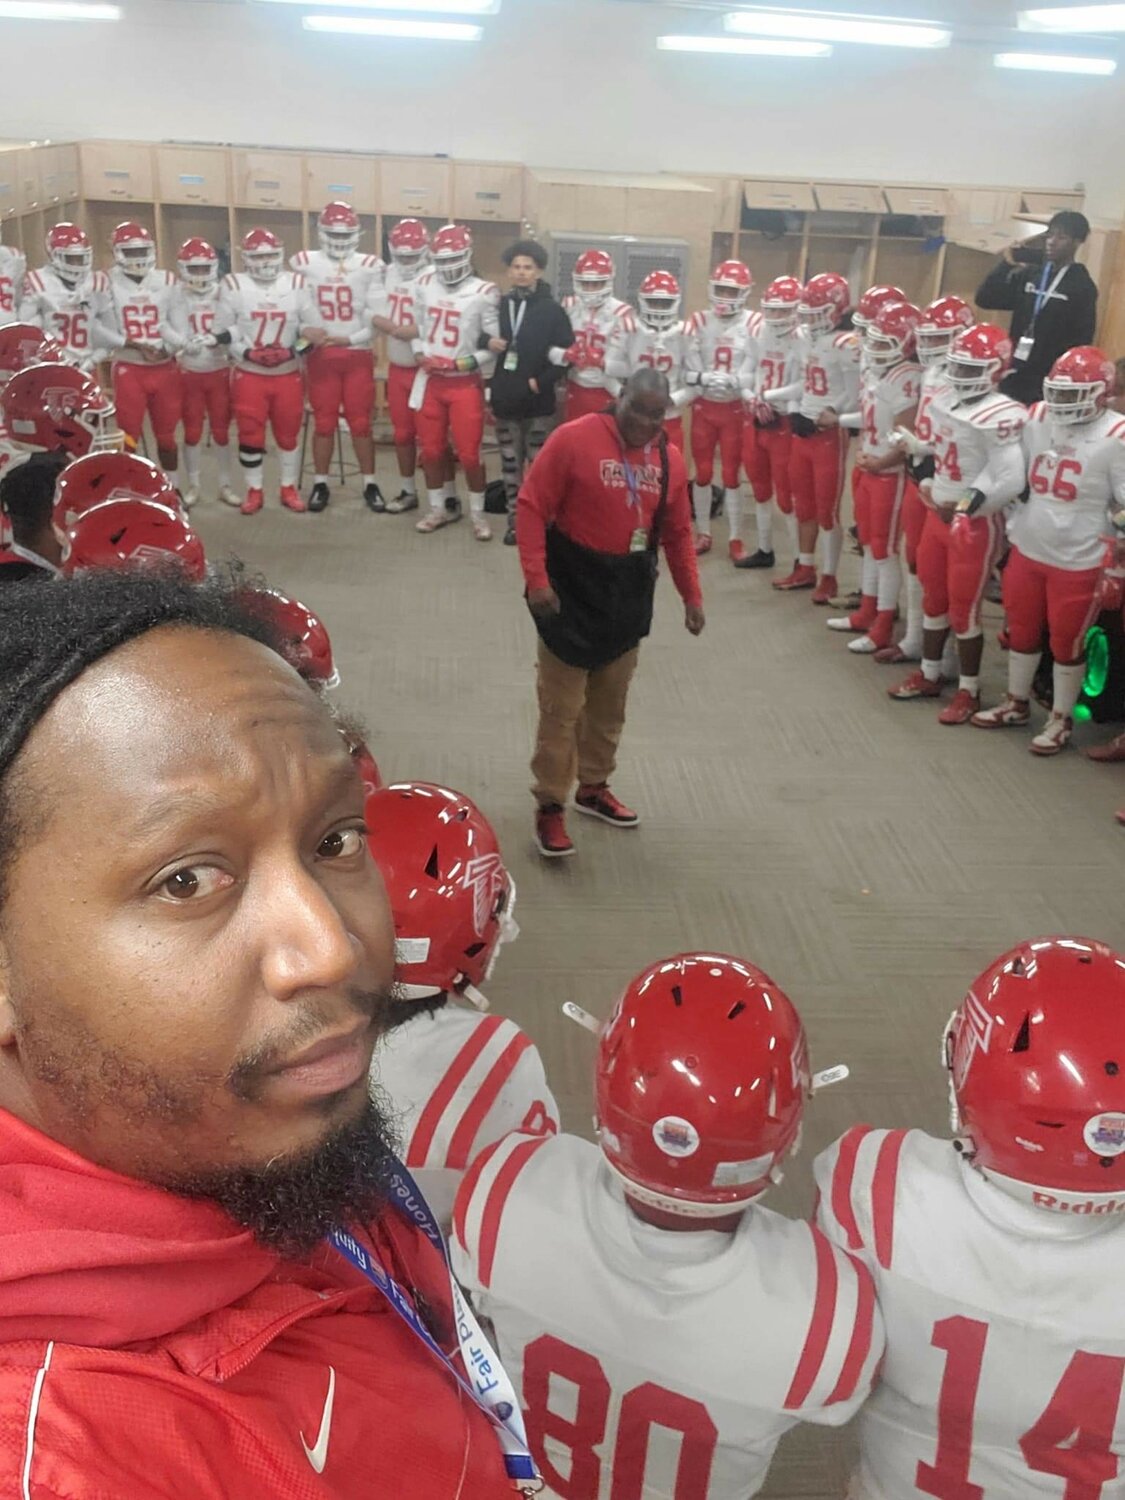 Seventy-First Assistant Coach Eric Hall (pictured center) addresses the team before the game Friday in their locker room at UNC-Chapel Hill's Kenan Stadium. Assistant Coach Anthone Harris is pictured in the foreground.